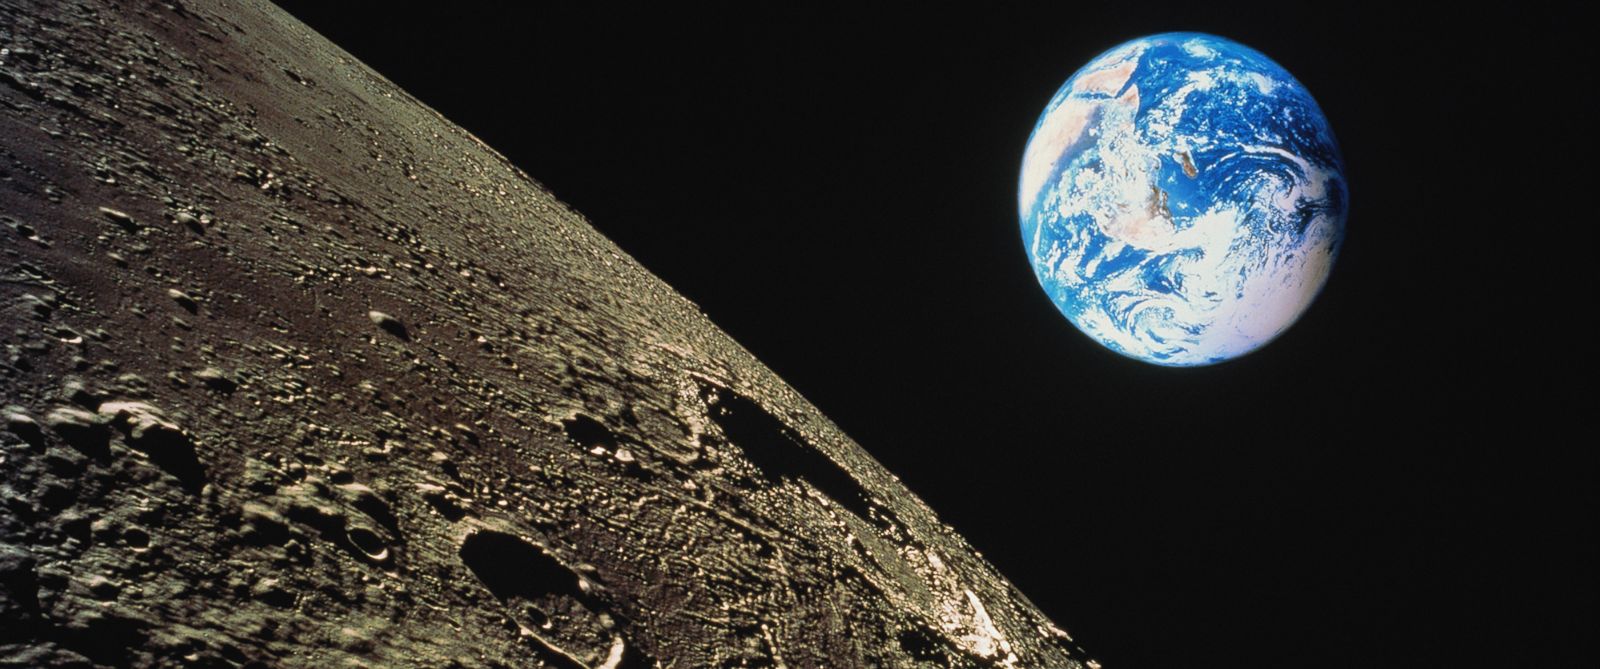 PHOTO: The moons surface is shown with the earth in background in this composite photograph.